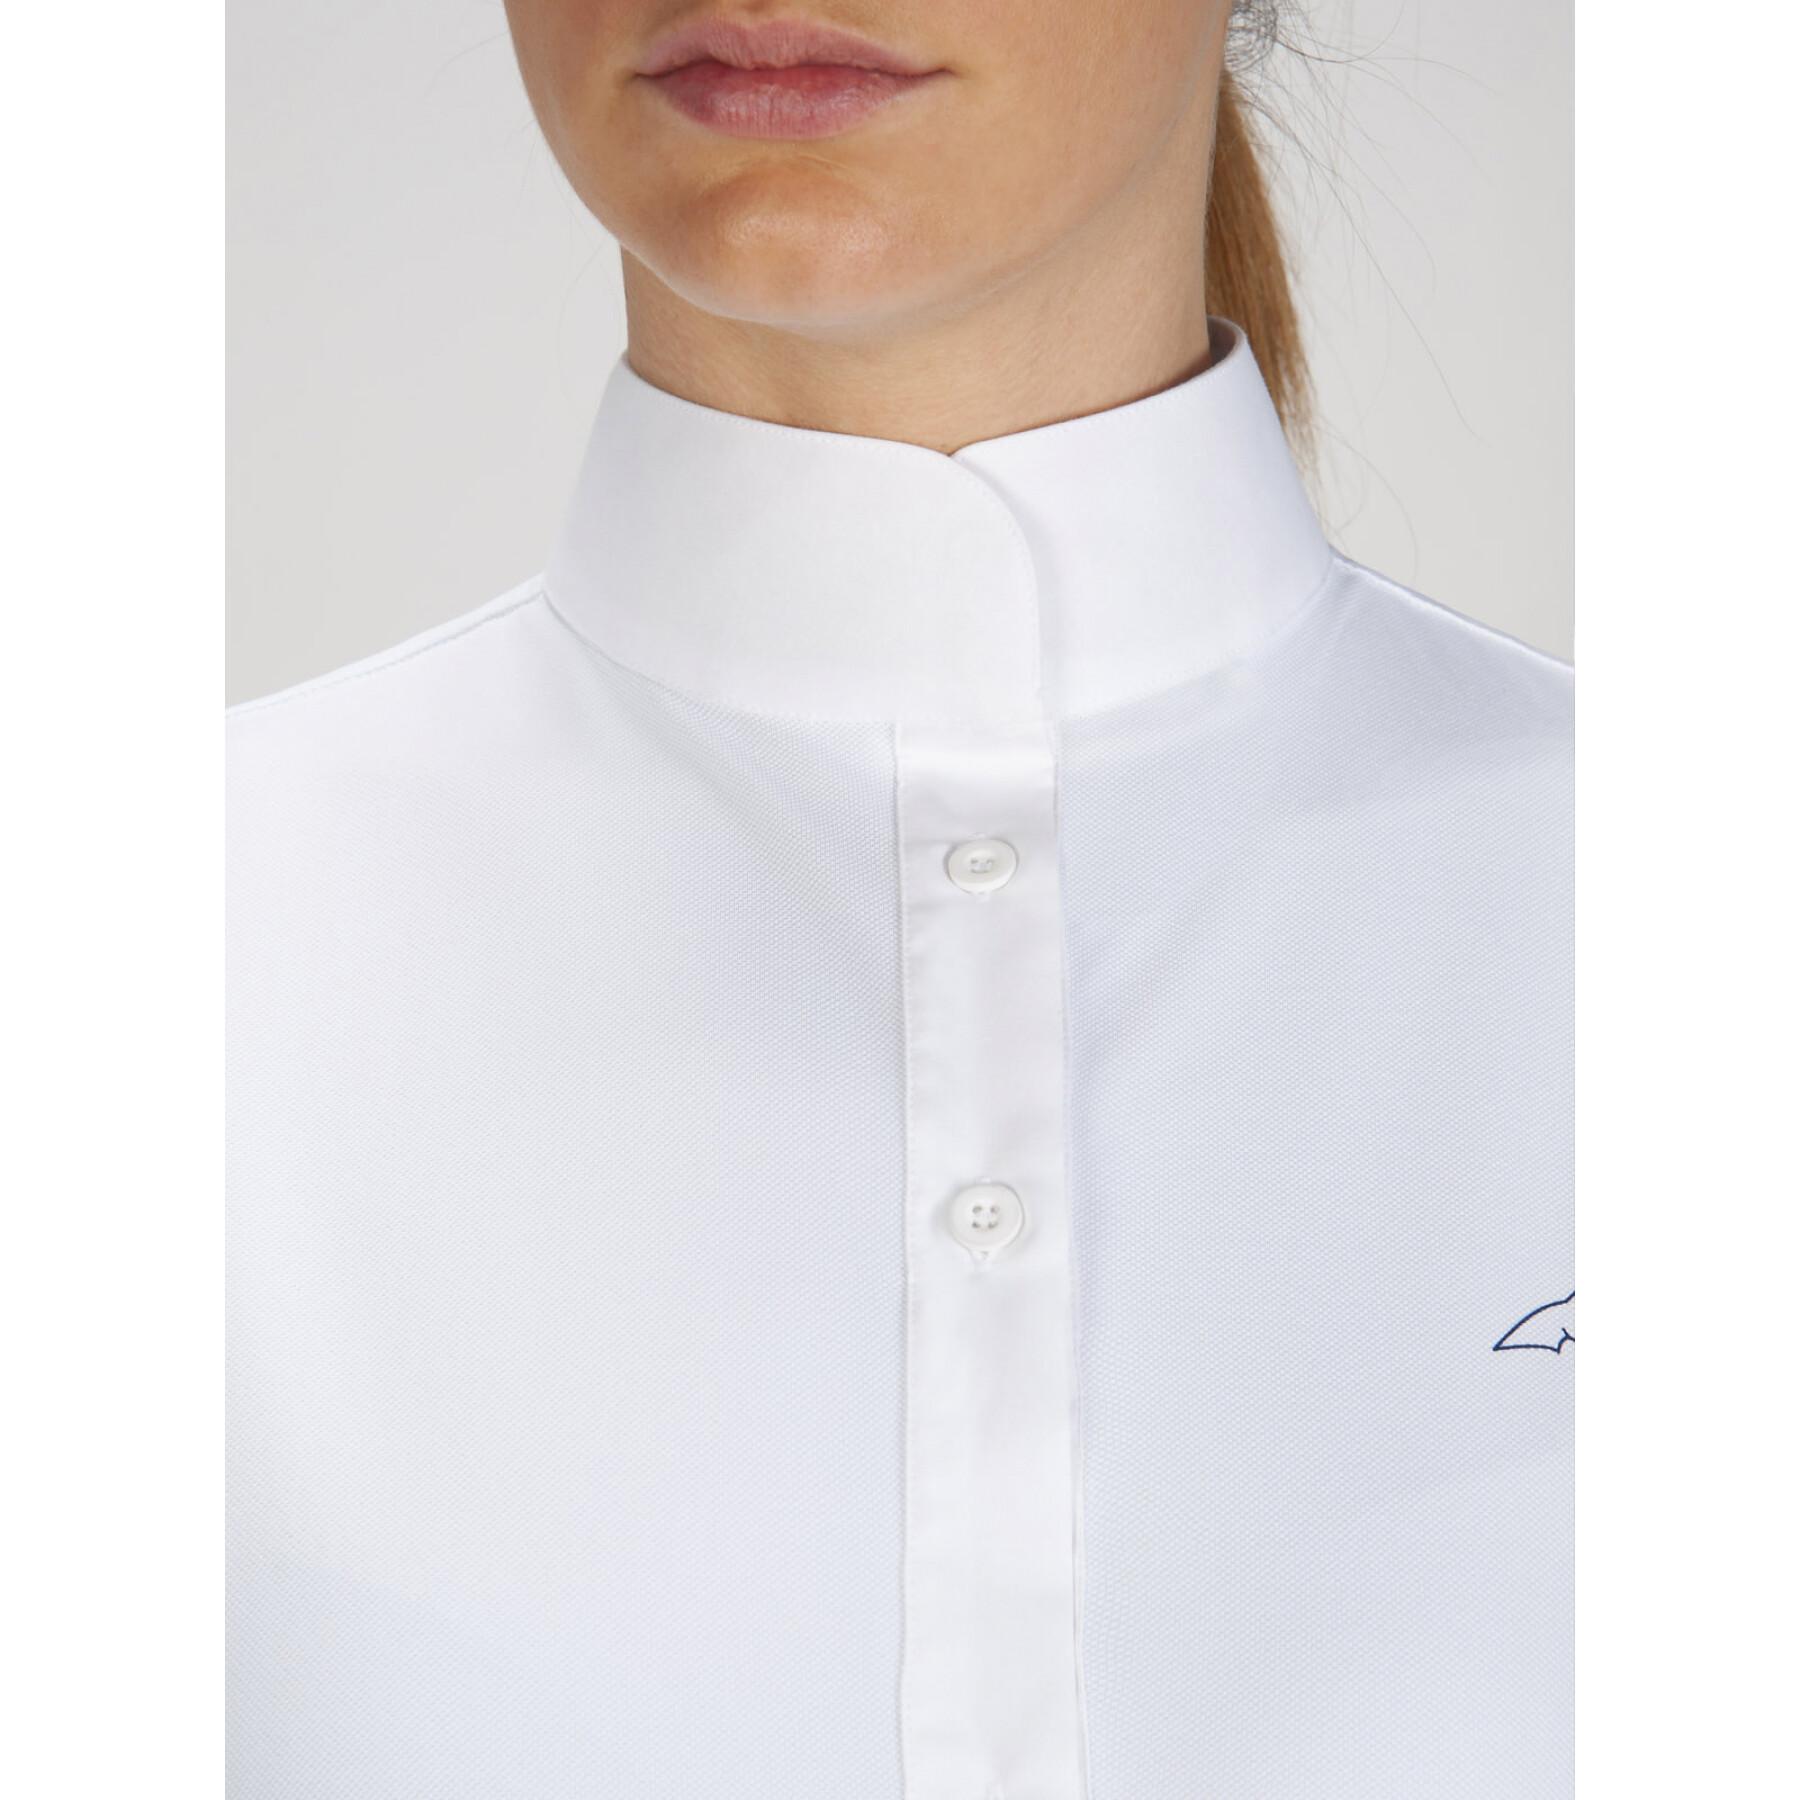 Women's riding competition shirt Equiline